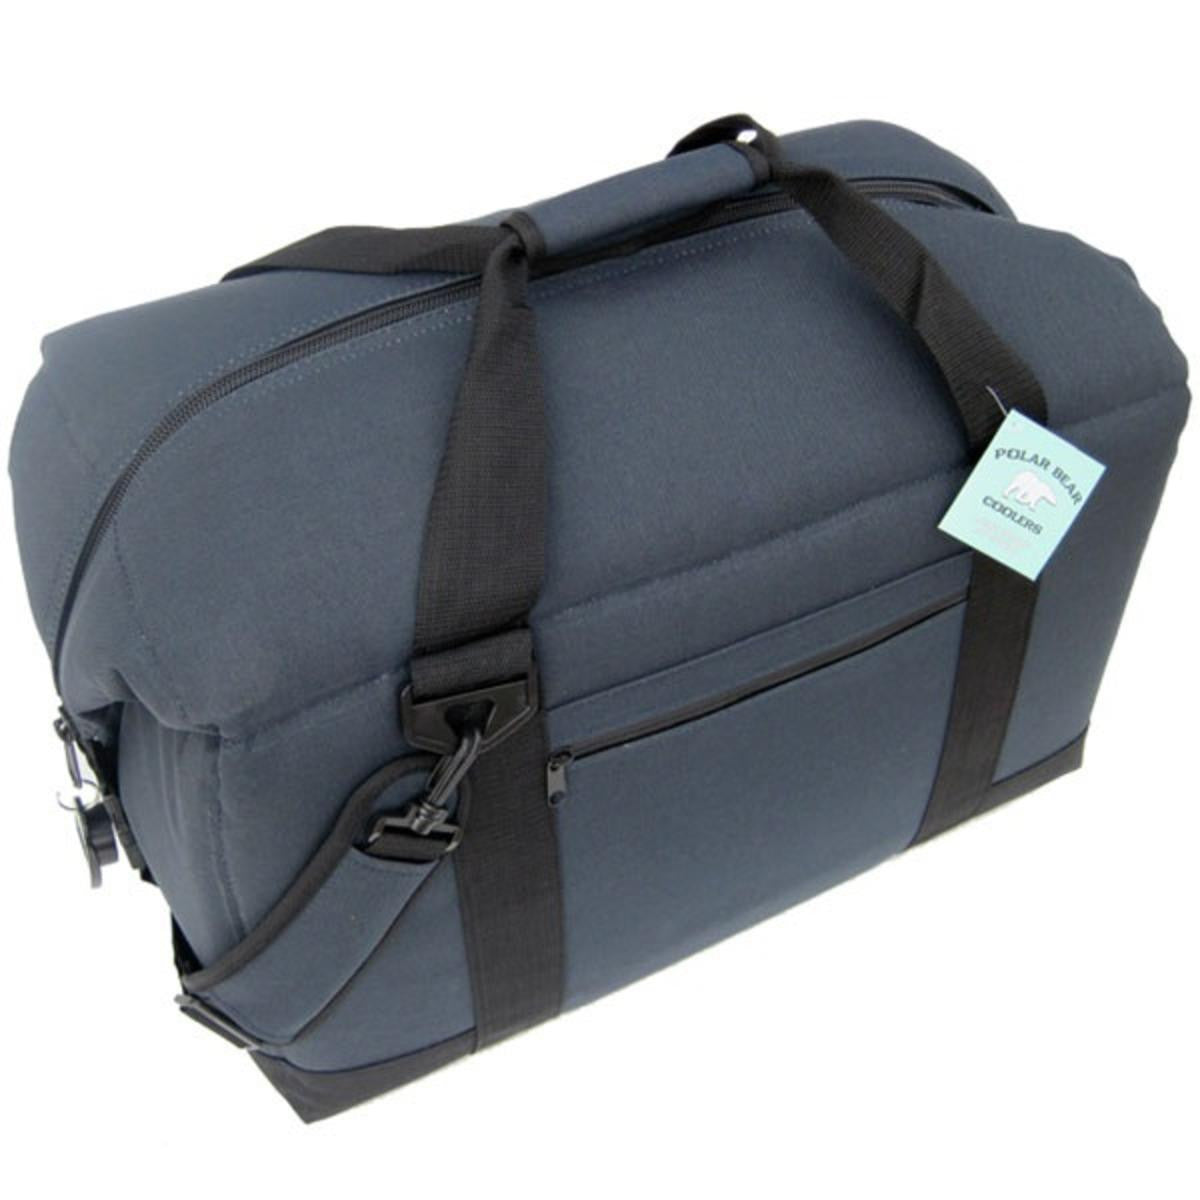 Original BackPack Soft Side Coolers by Polar Bear Coolers